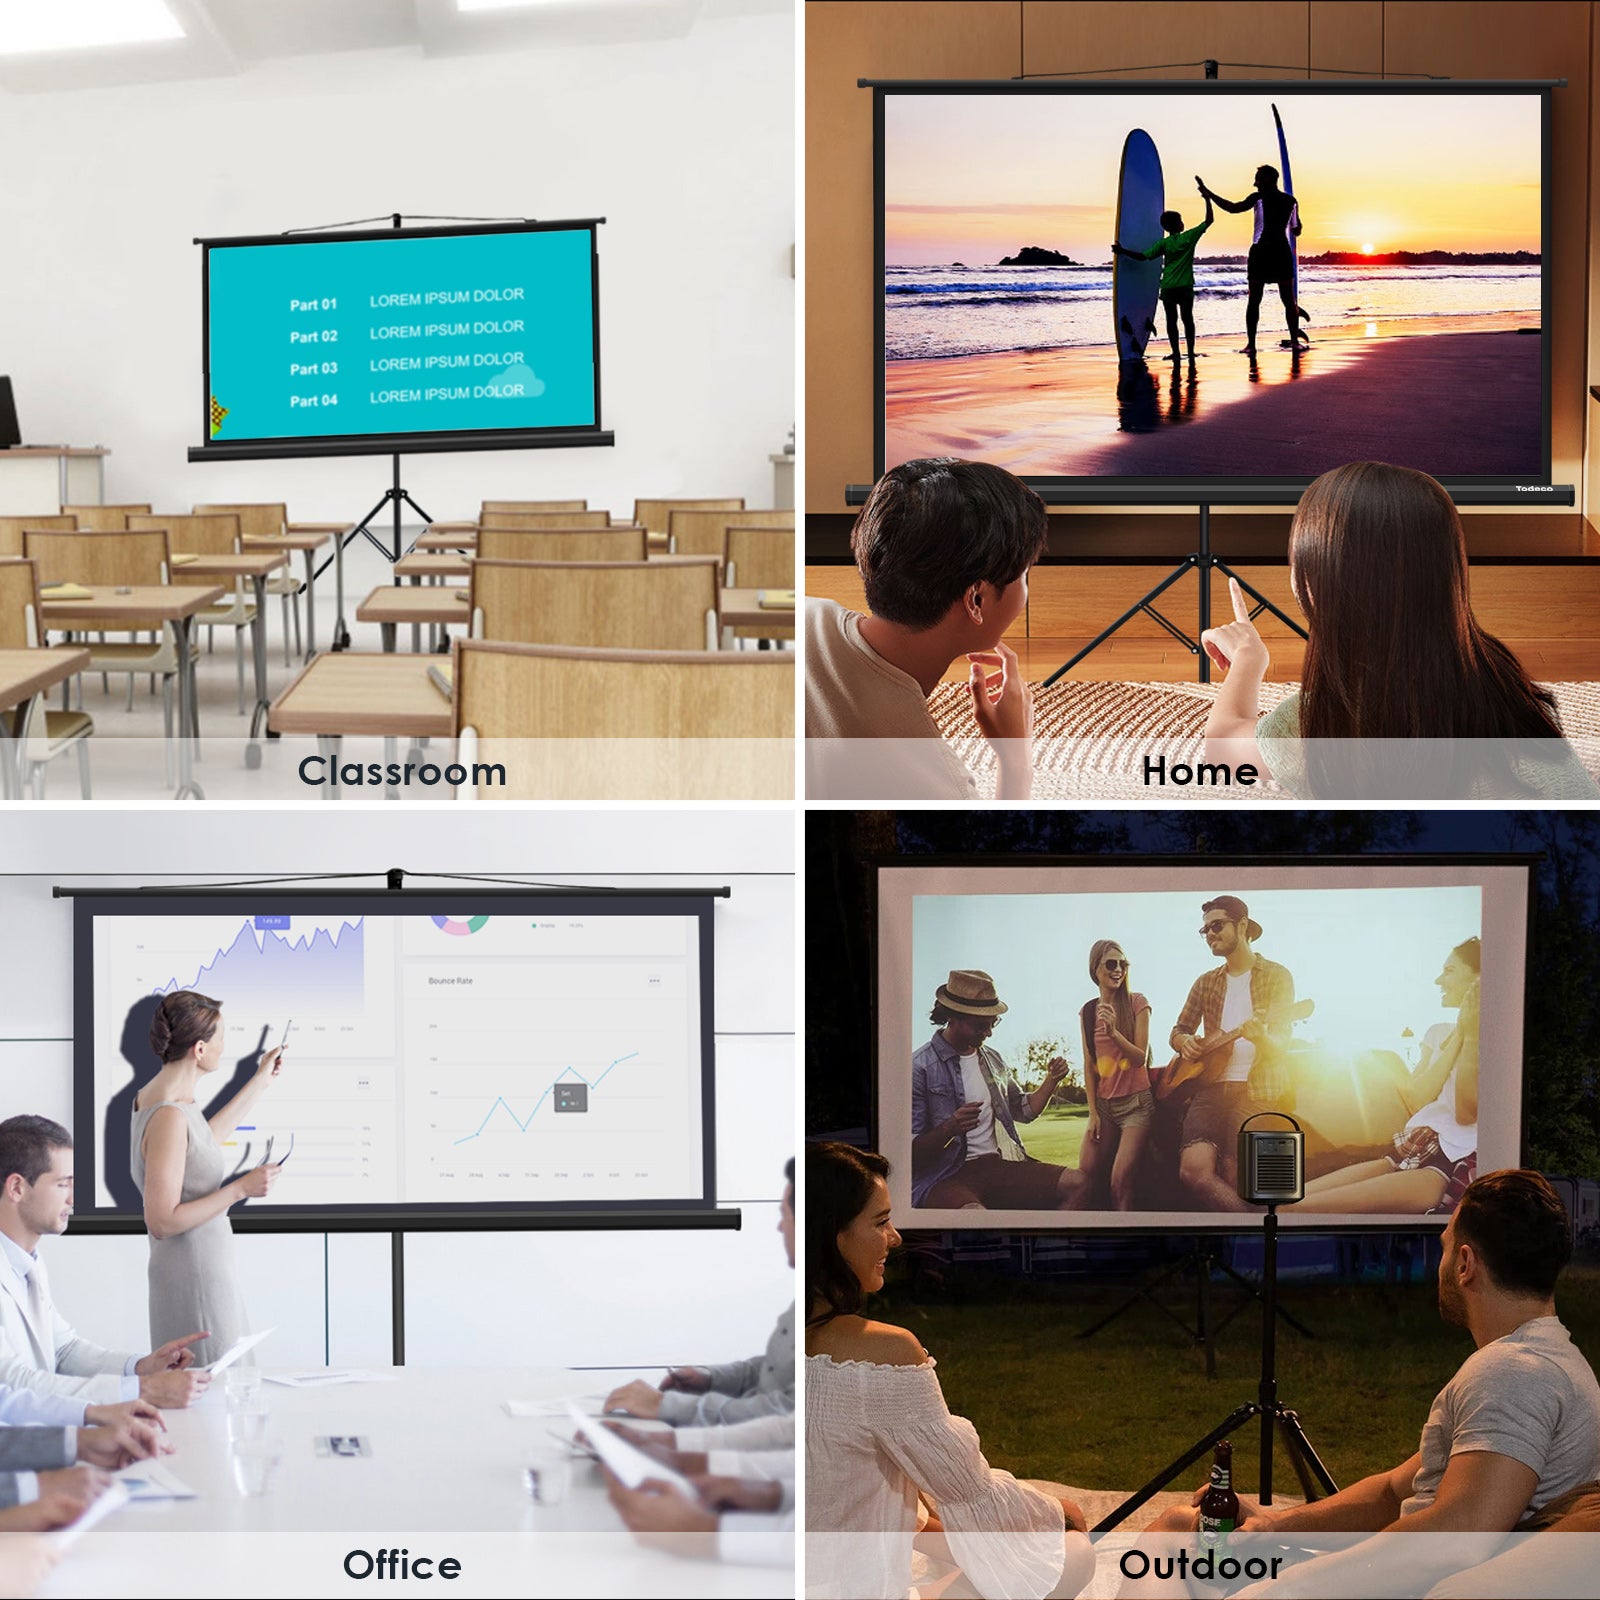 72-Inch-Floor-Standing-Projection-Screen-Foldable-Portable-Projector-Screen-with-Tripod-for-Indoor-or-Outdoor-Use-160-x-90-cm-16-9-Formats-HD-4K-3D-Black-72-Inch-Floor-Standing-Projection-Screen-Black